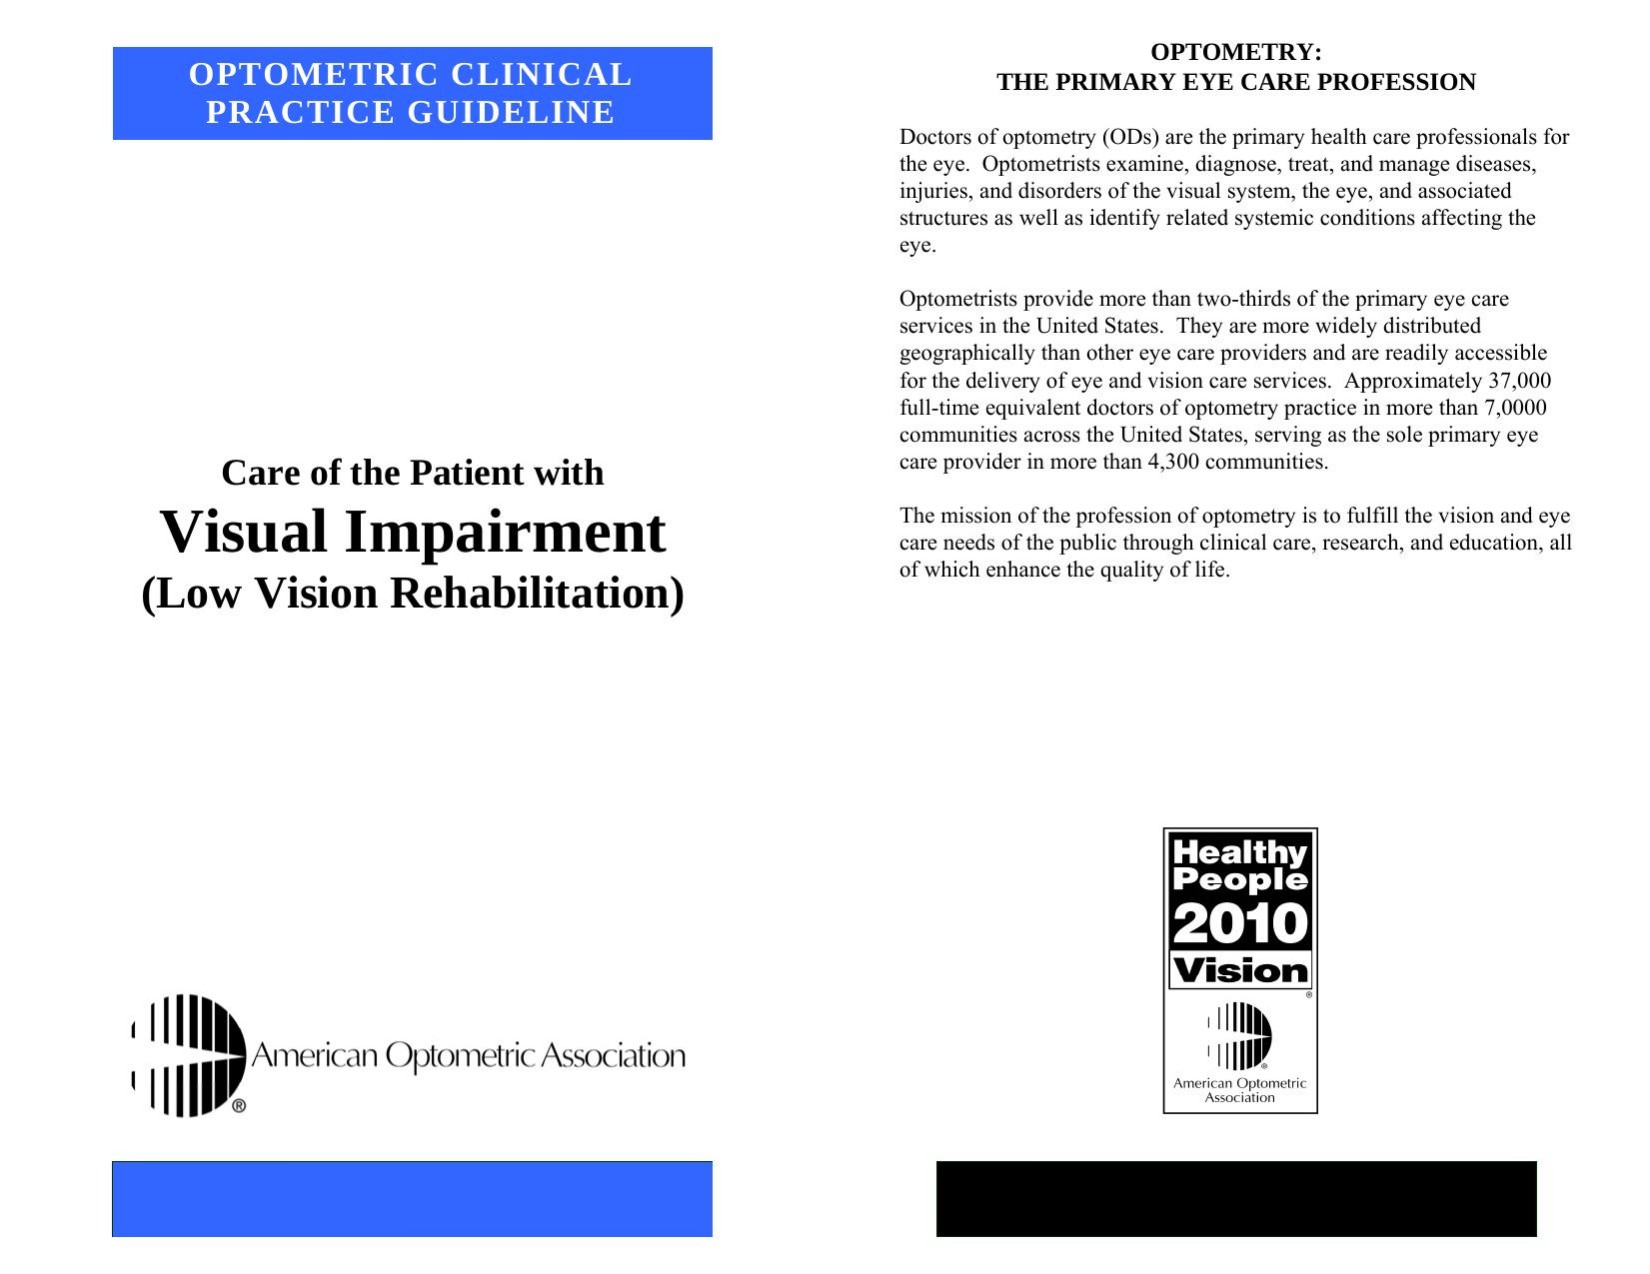 Microsoft Word - CPG14 Care of the Patient with Visual Impairment.doc